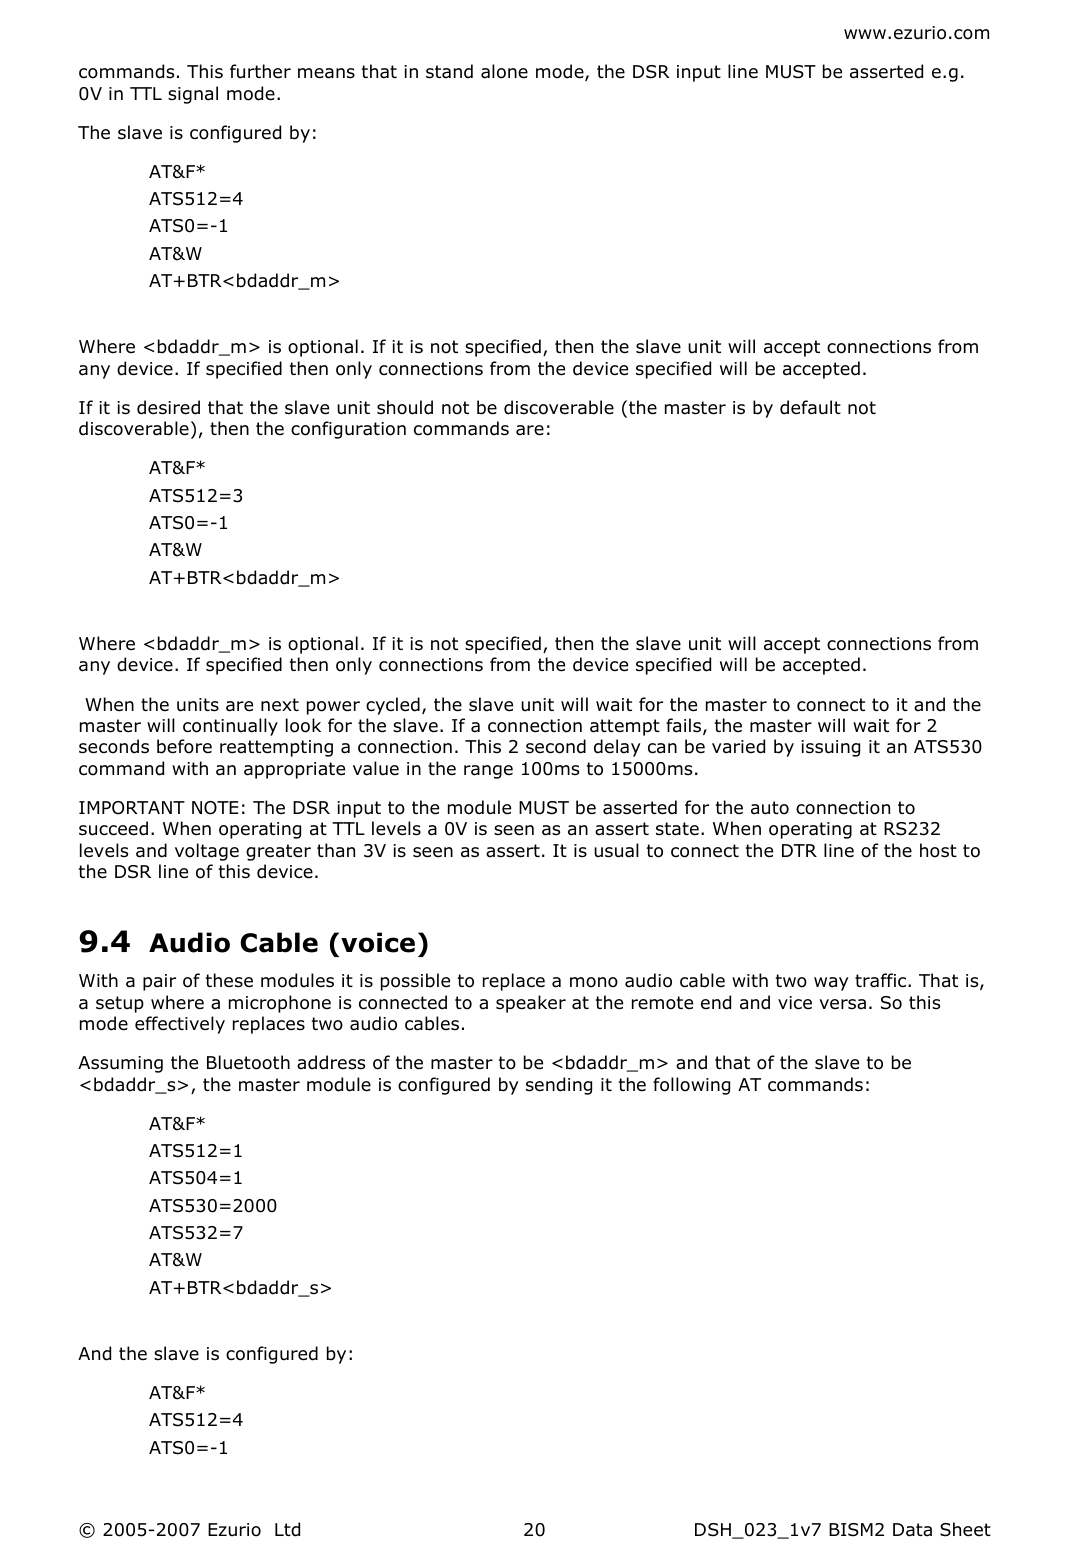 www.ezurio.com © 2005-2007 Ezurio  Ltd  DSH_023_1v7 BISM2 Data Sheet  20commands. This further means that in stand alone mode, the DSR input line MUST be asserted e.g. 0V in TTL signal mode. The slave is configured by: AT&amp;F* ATS512=4 ATS0=-1 AT&amp;W AT+BTR&lt;bdaddr_m&gt;  Where &lt;bdaddr_m&gt; is optional. If it is not specified, then the slave unit will accept connections from any device. If specified then only connections from the device specified will be accepted. If it is desired that the slave unit should not be discoverable (the master is by default not discoverable), then the configuration commands are: AT&amp;F* ATS512=3 ATS0=-1 AT&amp;W AT+BTR&lt;bdaddr_m&gt;  Where &lt;bdaddr_m&gt; is optional. If it is not specified, then the slave unit will accept connections from any device. If specified then only connections from the device specified will be accepted.  When the units are next power cycled, the slave unit will wait for the master to connect to it and the master will continually look for the slave. If a connection attempt fails, the master will wait for 2 seconds before reattempting a connection. This 2 second delay can be varied by issuing it an ATS530 command with an appropriate value in the range 100ms to 15000ms. IMPORTANT NOTE: The DSR input to the module MUST be asserted for the auto connection to succeed. When operating at TTL levels a 0V is seen as an assert state. When operating at RS232 levels and voltage greater than 3V is seen as assert. It is usual to connect the DTR line of the host to the DSR line of this device. 9.4 Audio Cable (voice) With a pair of these modules it is possible to replace a mono audio cable with two way traffic. That is, a setup where a microphone is connected to a speaker at the remote end and vice versa. So this mode effectively replaces two audio cables. Assuming the Bluetooth address of the master to be &lt;bdaddr_m&gt; and that of the slave to be &lt;bdaddr_s&gt;, the master module is configured by sending it the following AT commands: AT&amp;F* ATS512=1 ATS504=1 ATS530=2000 ATS532=7 AT&amp;W AT+BTR&lt;bdaddr_s&gt;  And the slave is configured by: AT&amp;F* ATS512=4 ATS0=-1 